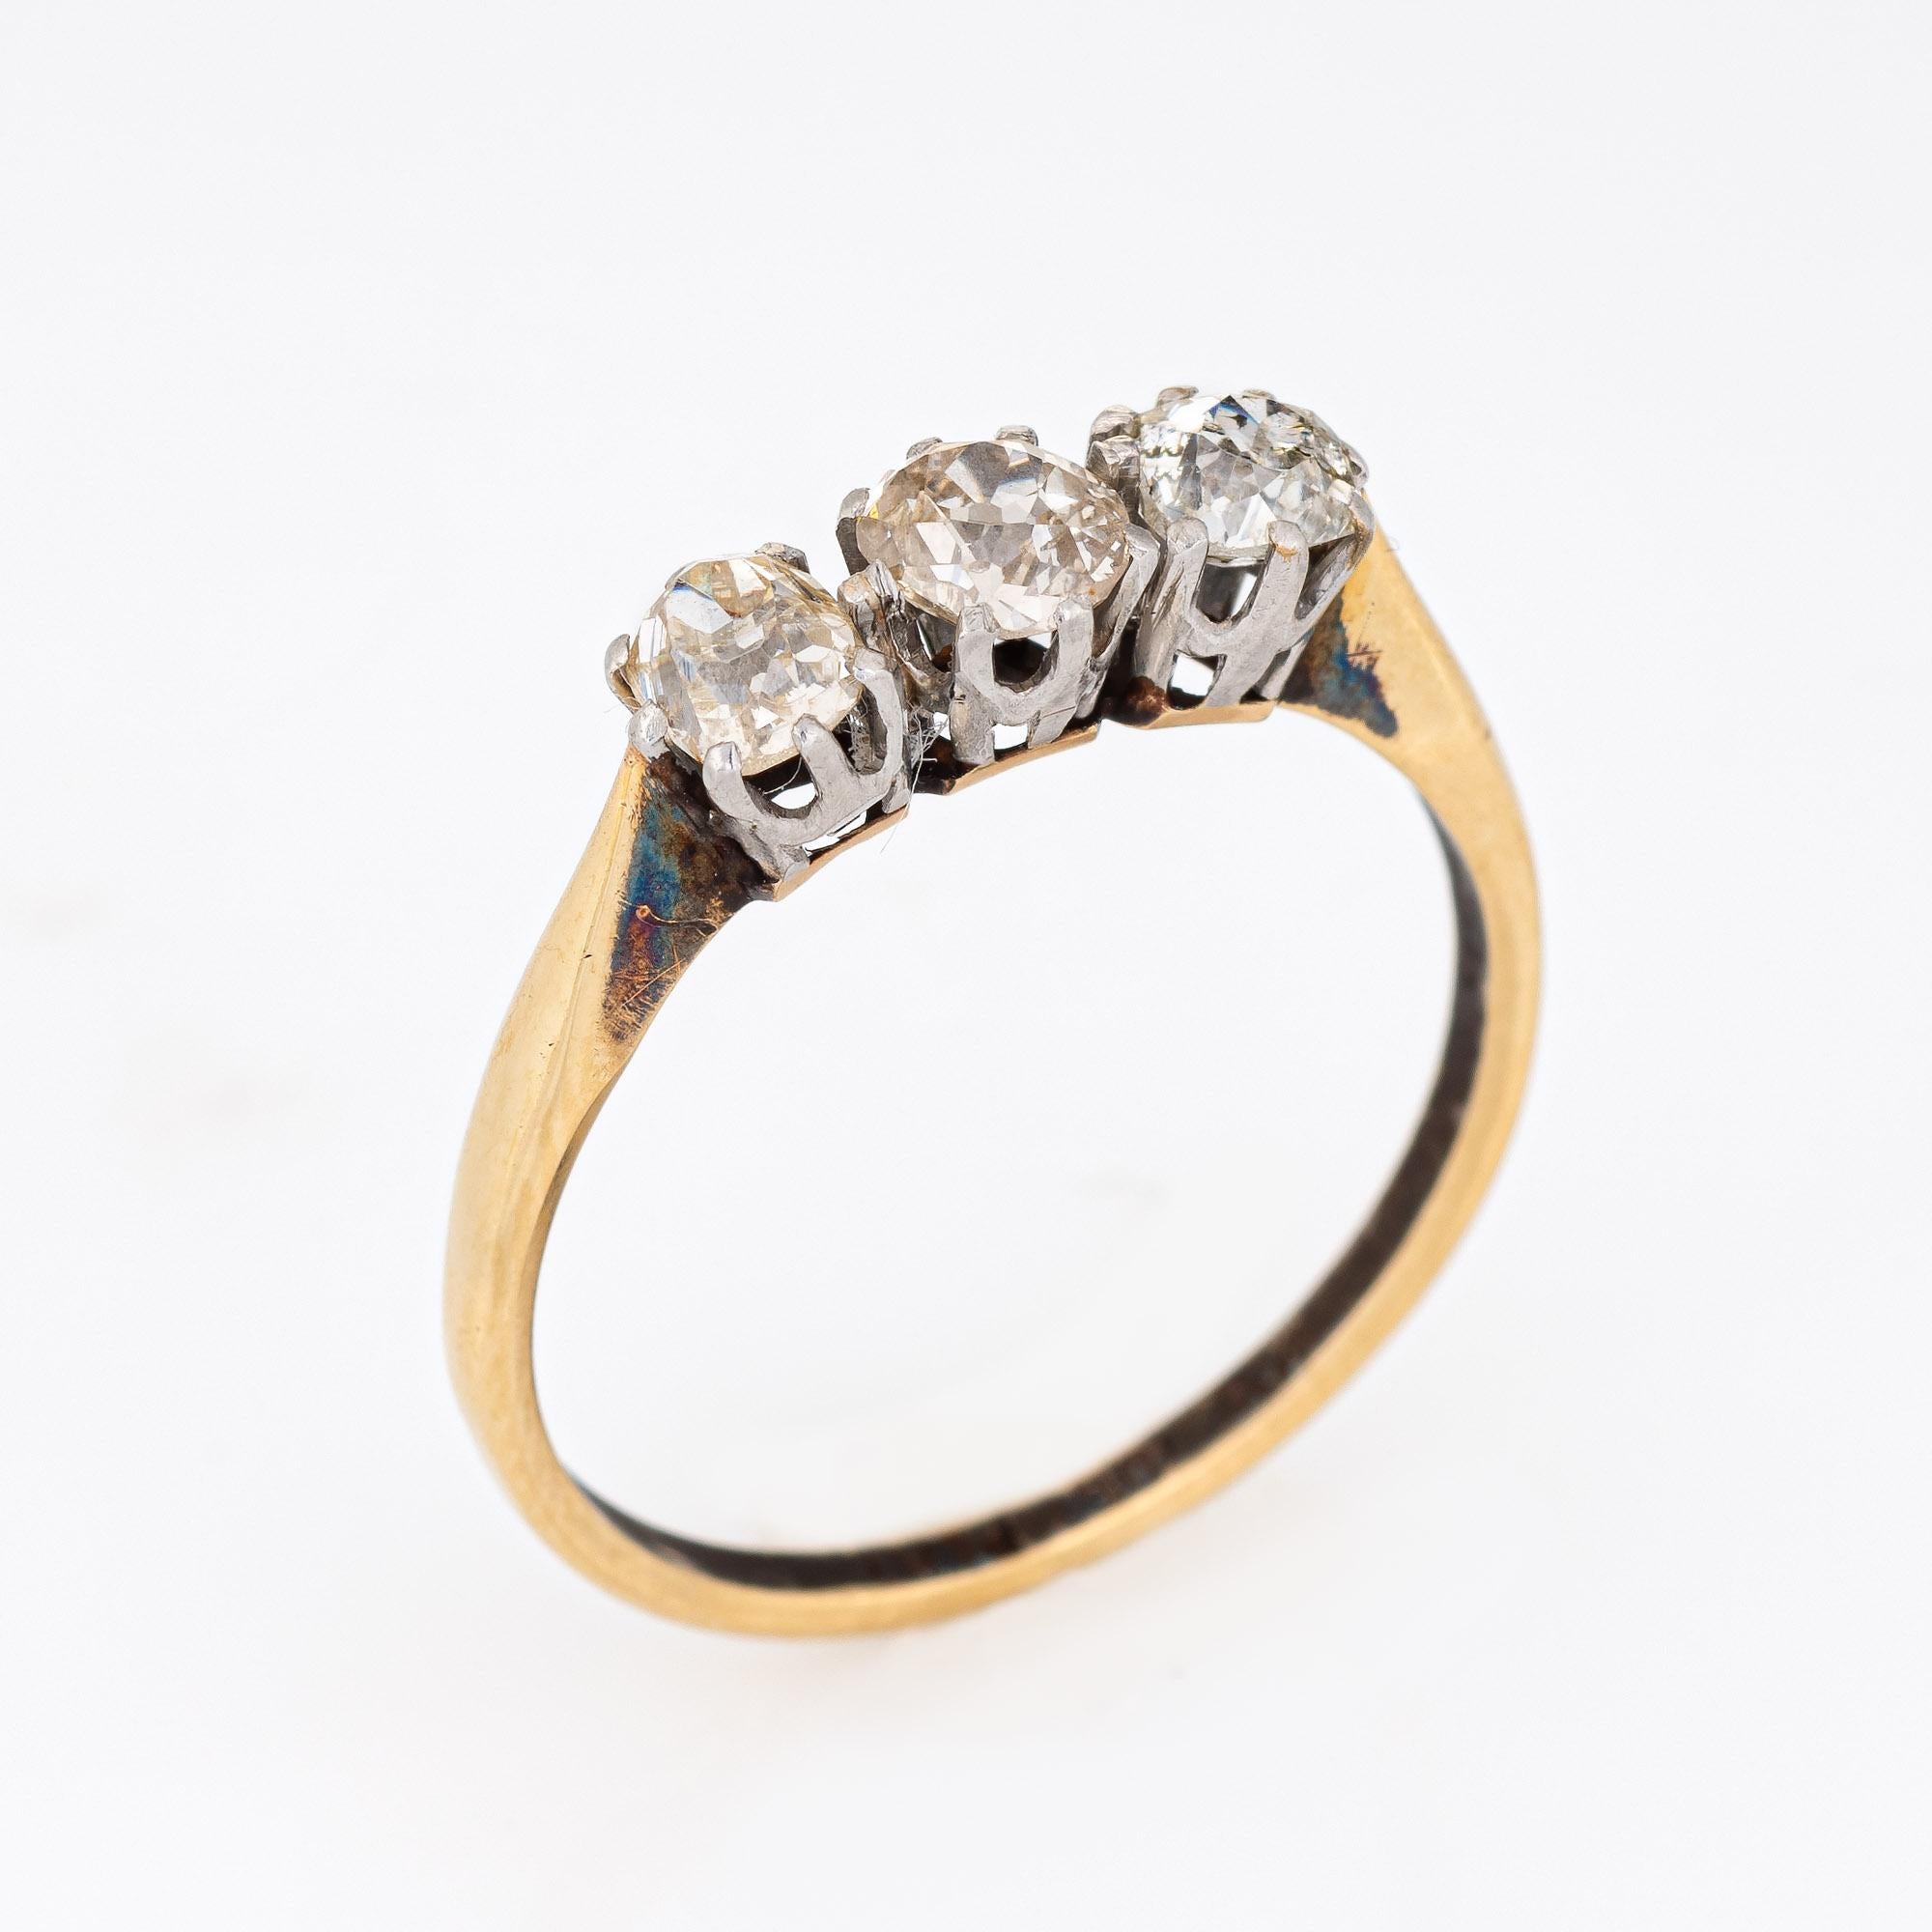 Elegant and finely detailed Edwardian era ring (circa 1900s to 1910s), crafted in 18 karat yellow gold & platinum.  

Three old mine cut diamonds total an estimated 0.25 carats each (0.75 carats total estimated weight). The diamonds are estimated at